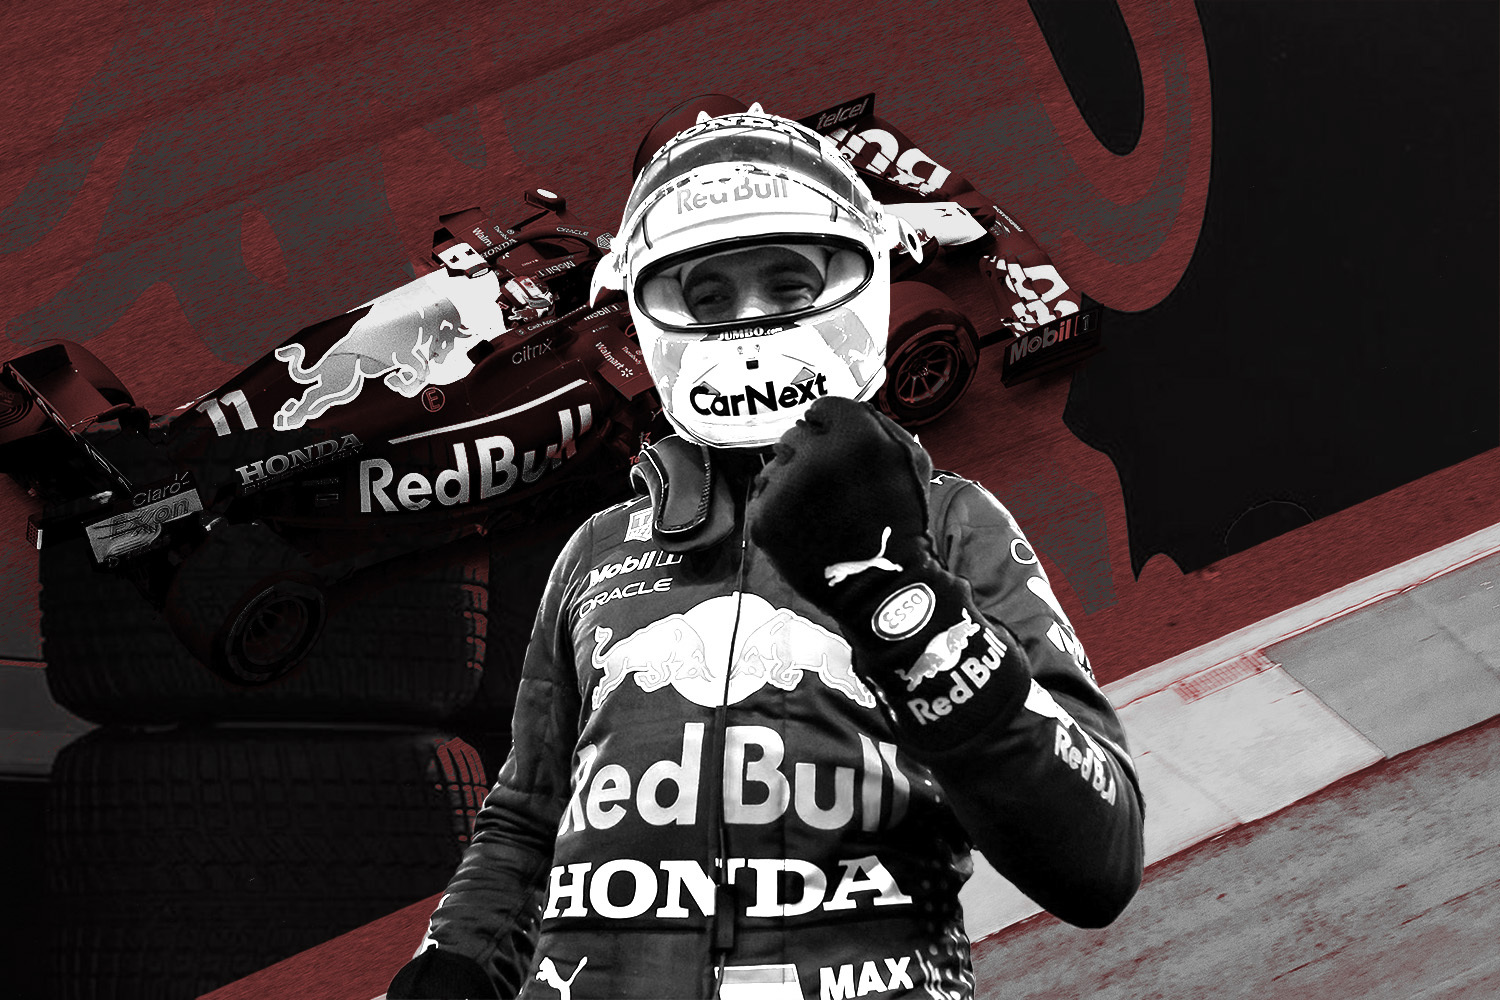 Red Bull Racing, Official Recovery Partner